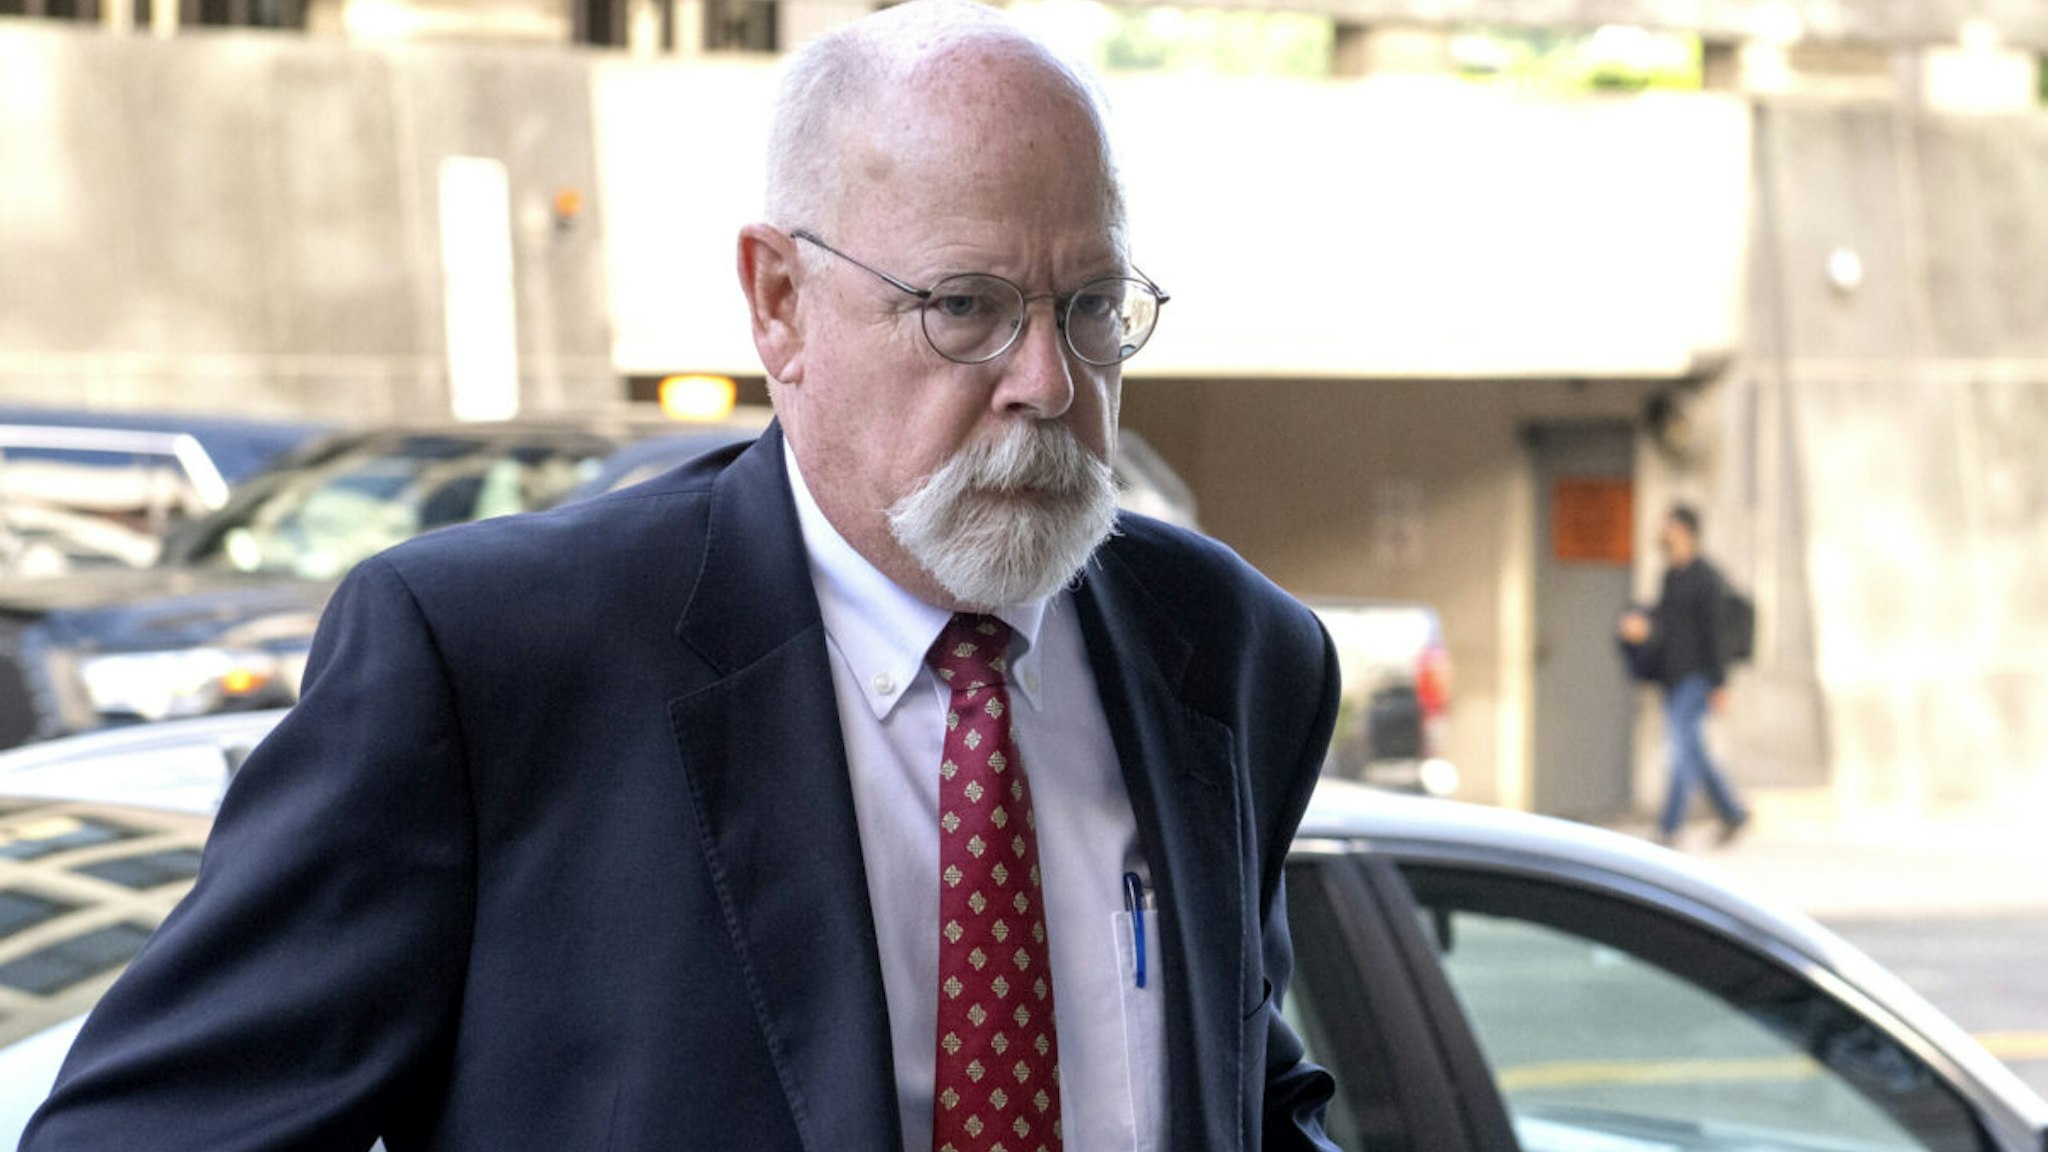 Special Counsel John Durham, who then-United States Attorney General William Barr appointed in 2019 after the release of the Mueller report to probe the origins of the Trump-Russia investigation, arrives for his trial at the United States District Court for the District of Columbia on May 17, 2022 in Washington, DC.